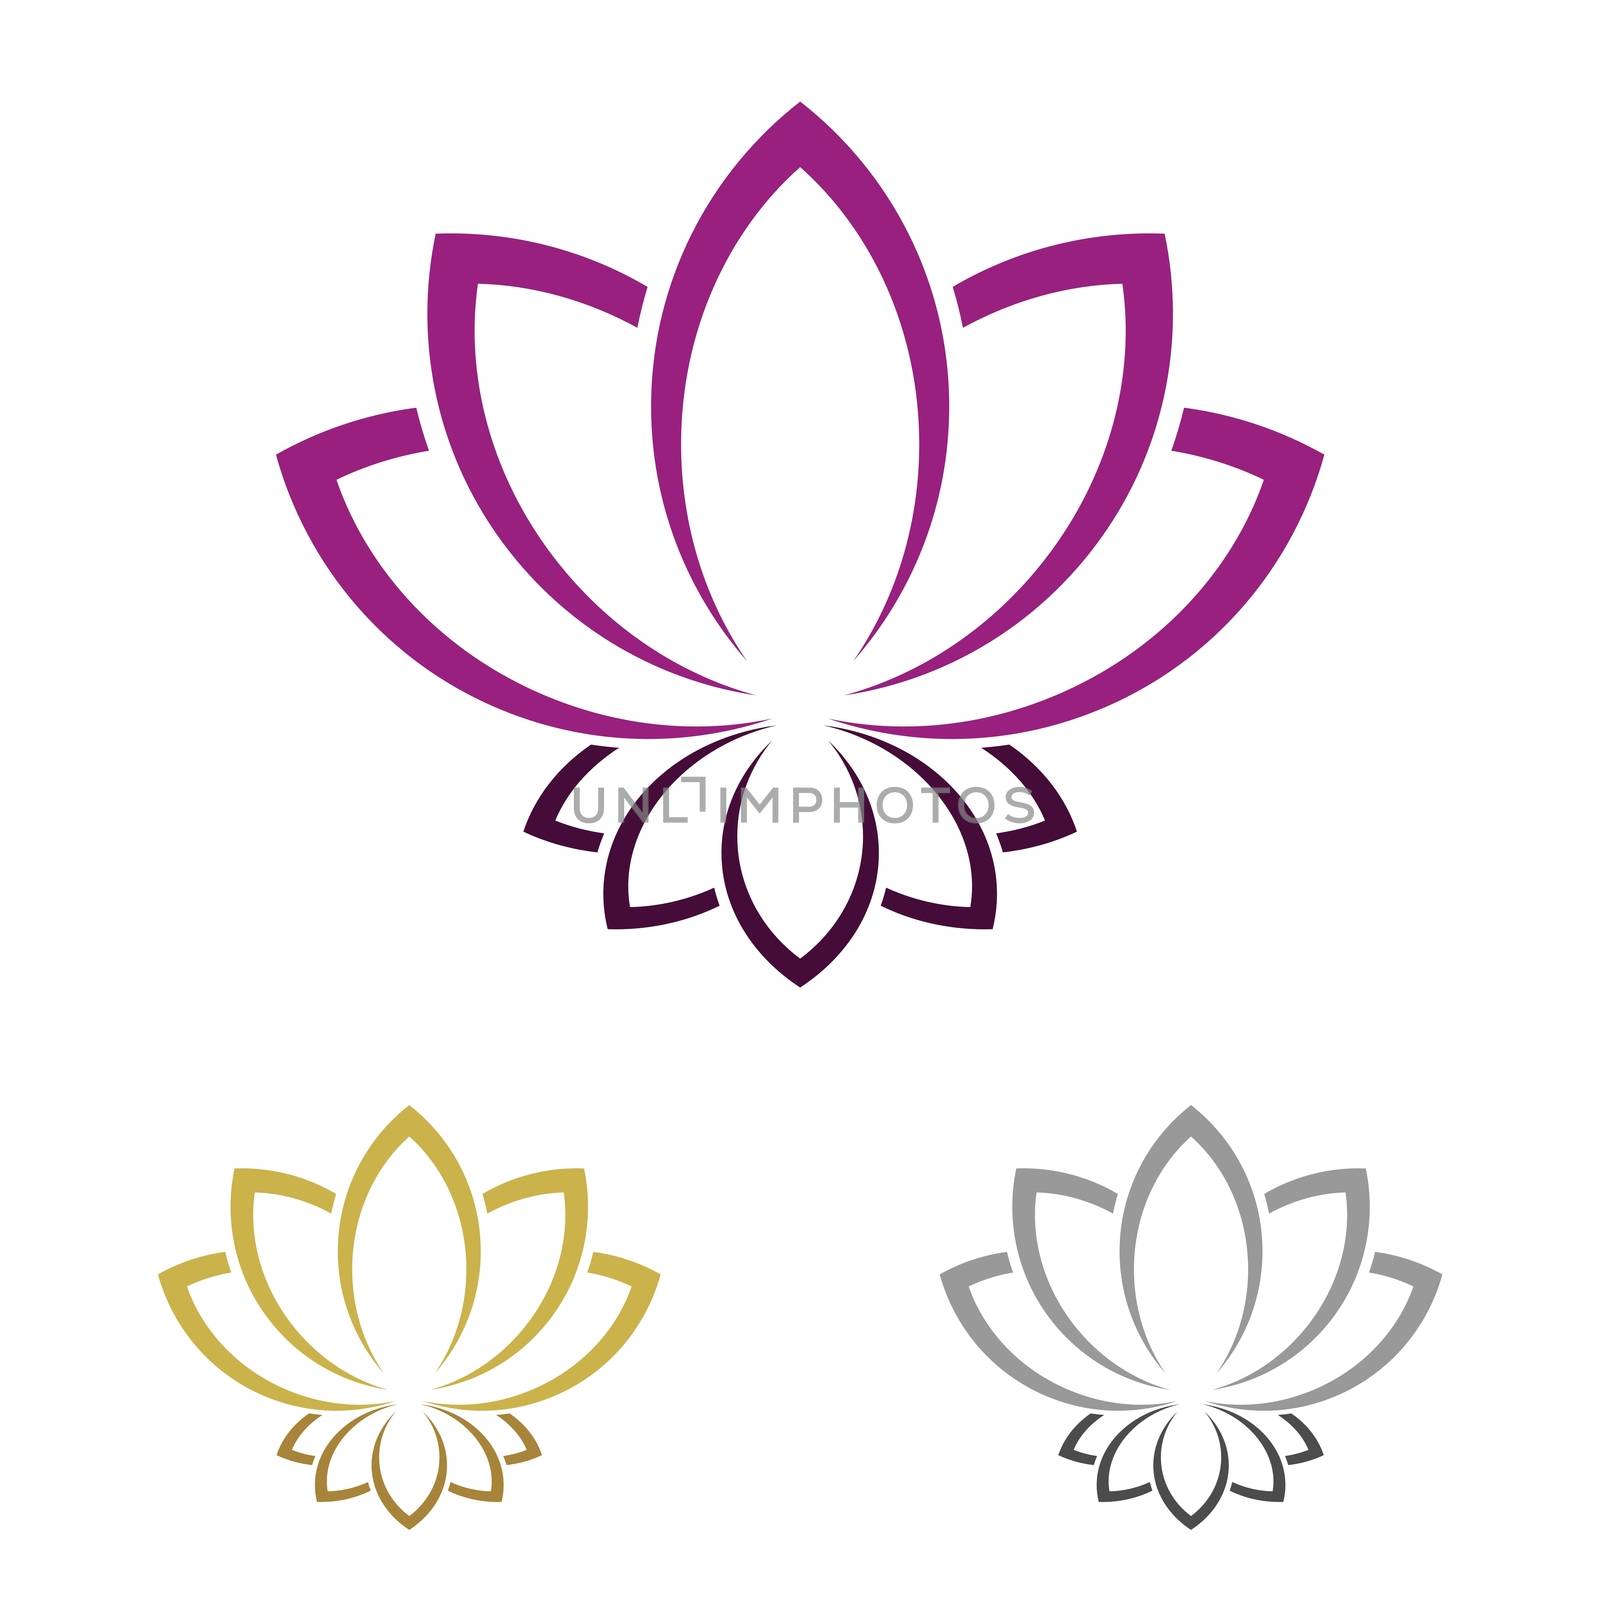 Lotus or Lily Flower Logo Template Illustration Design. Vector EPS 10. by soponyono1